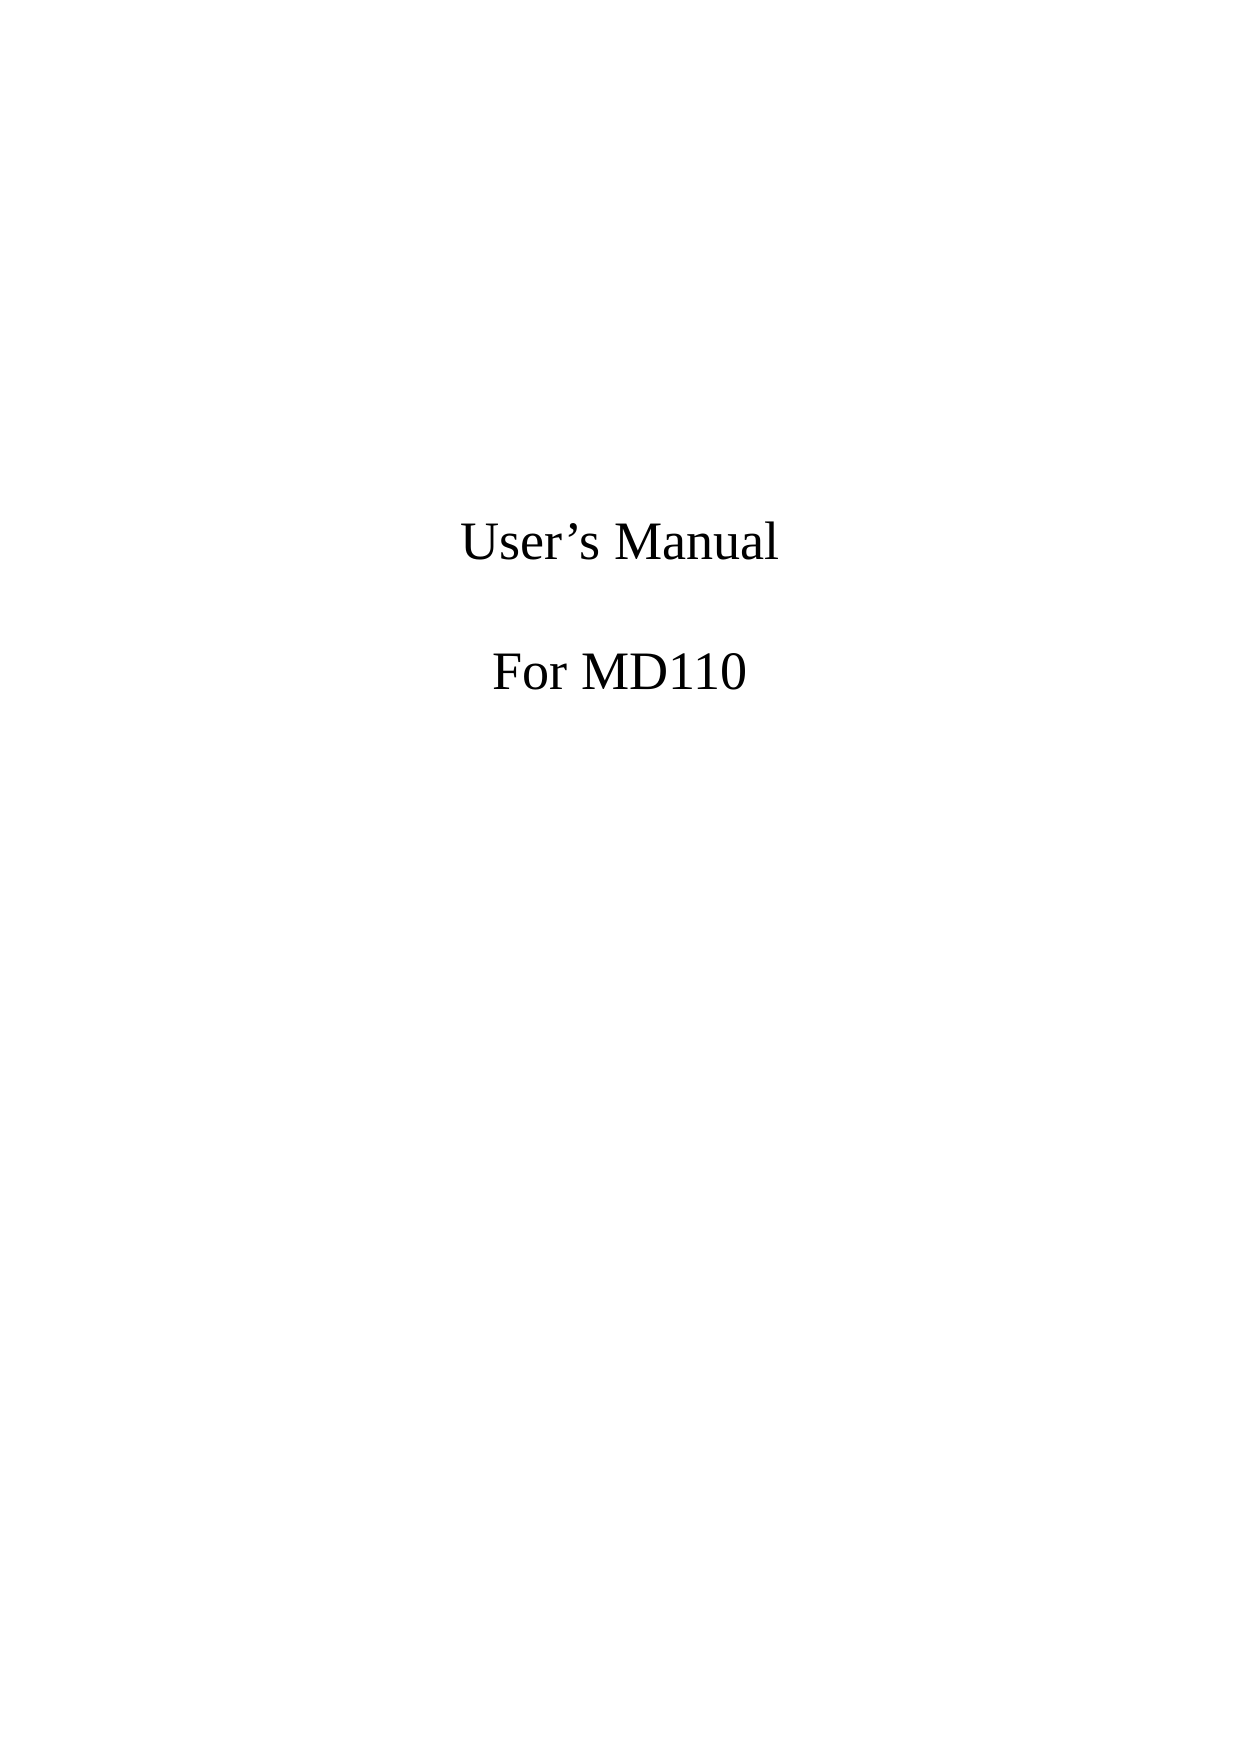            User’s Manual  For MD110                           